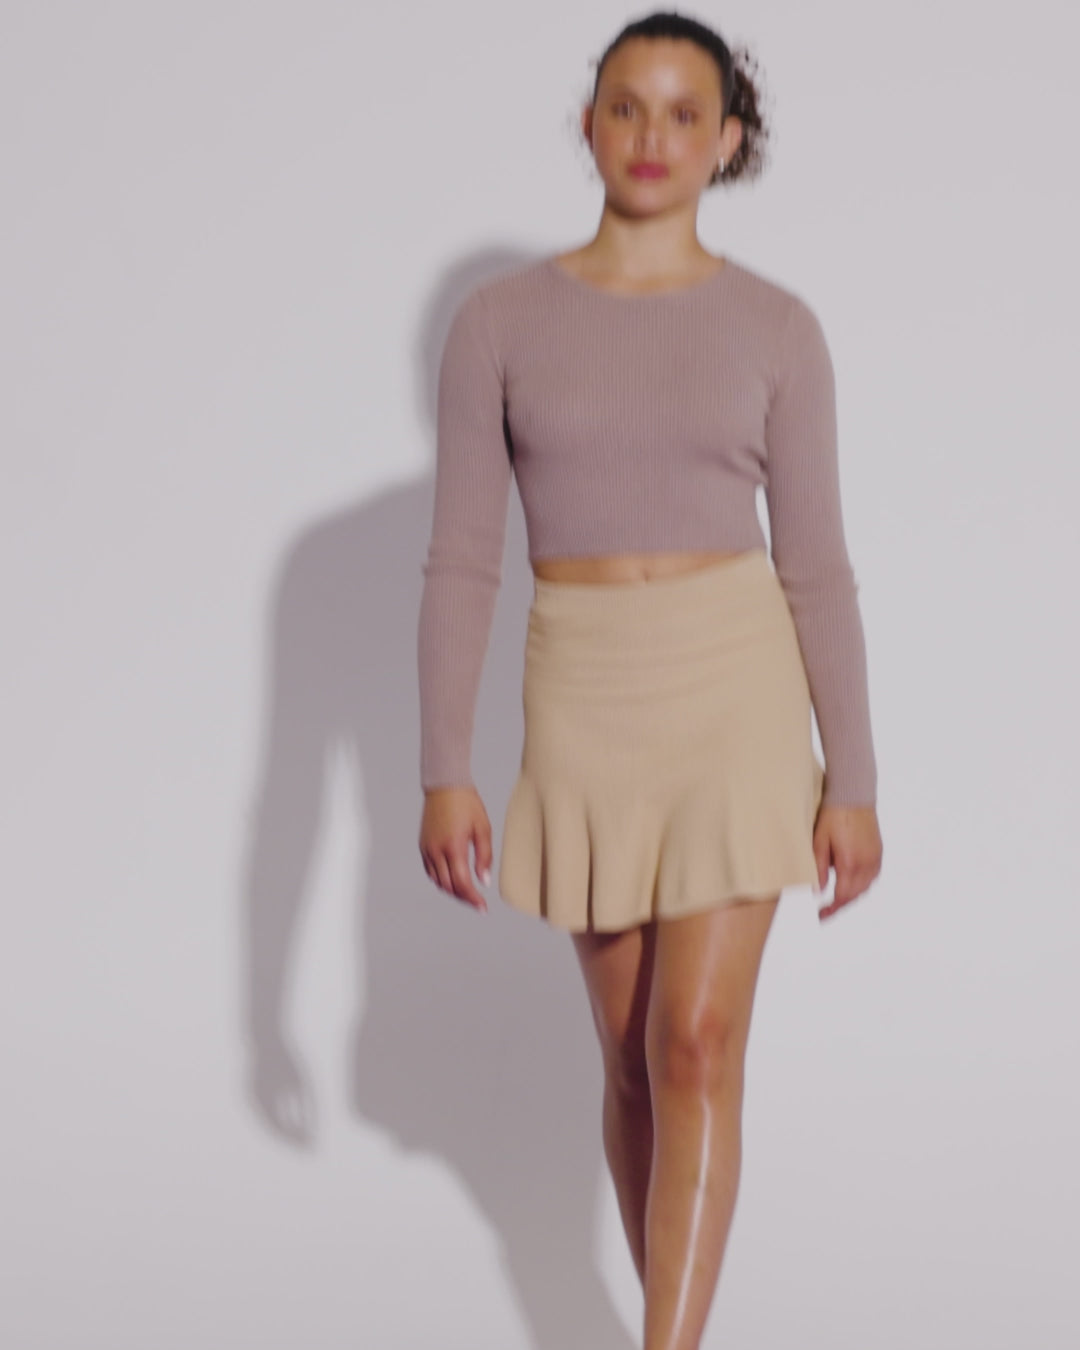 Video with no sound of a model in a beige shirt and skirt wearing a pair of light beige Doll flats.